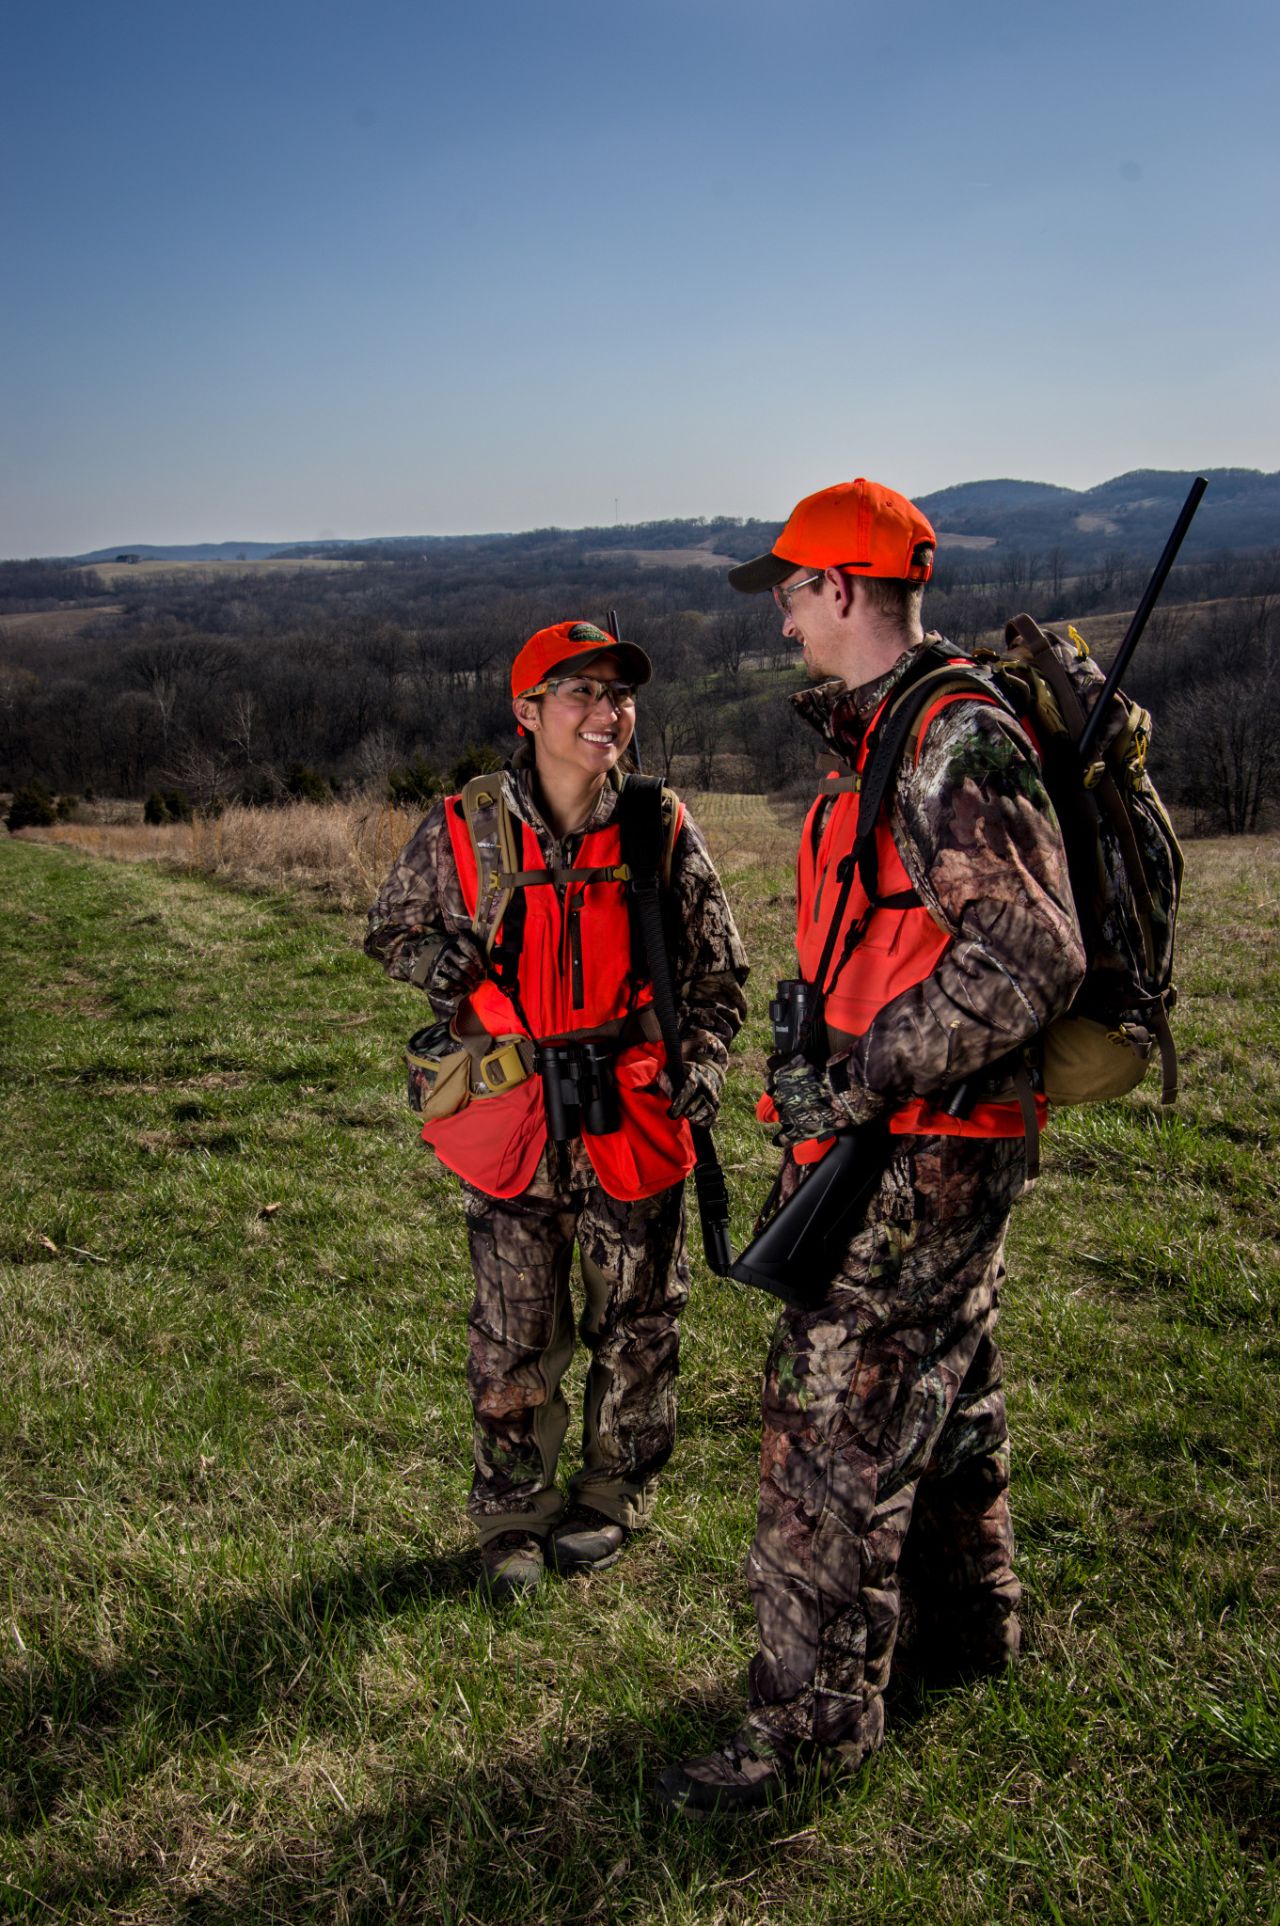 NEW Sunday Hunting LAW - Pennsylvania Celebrates More Hunting for Everyone